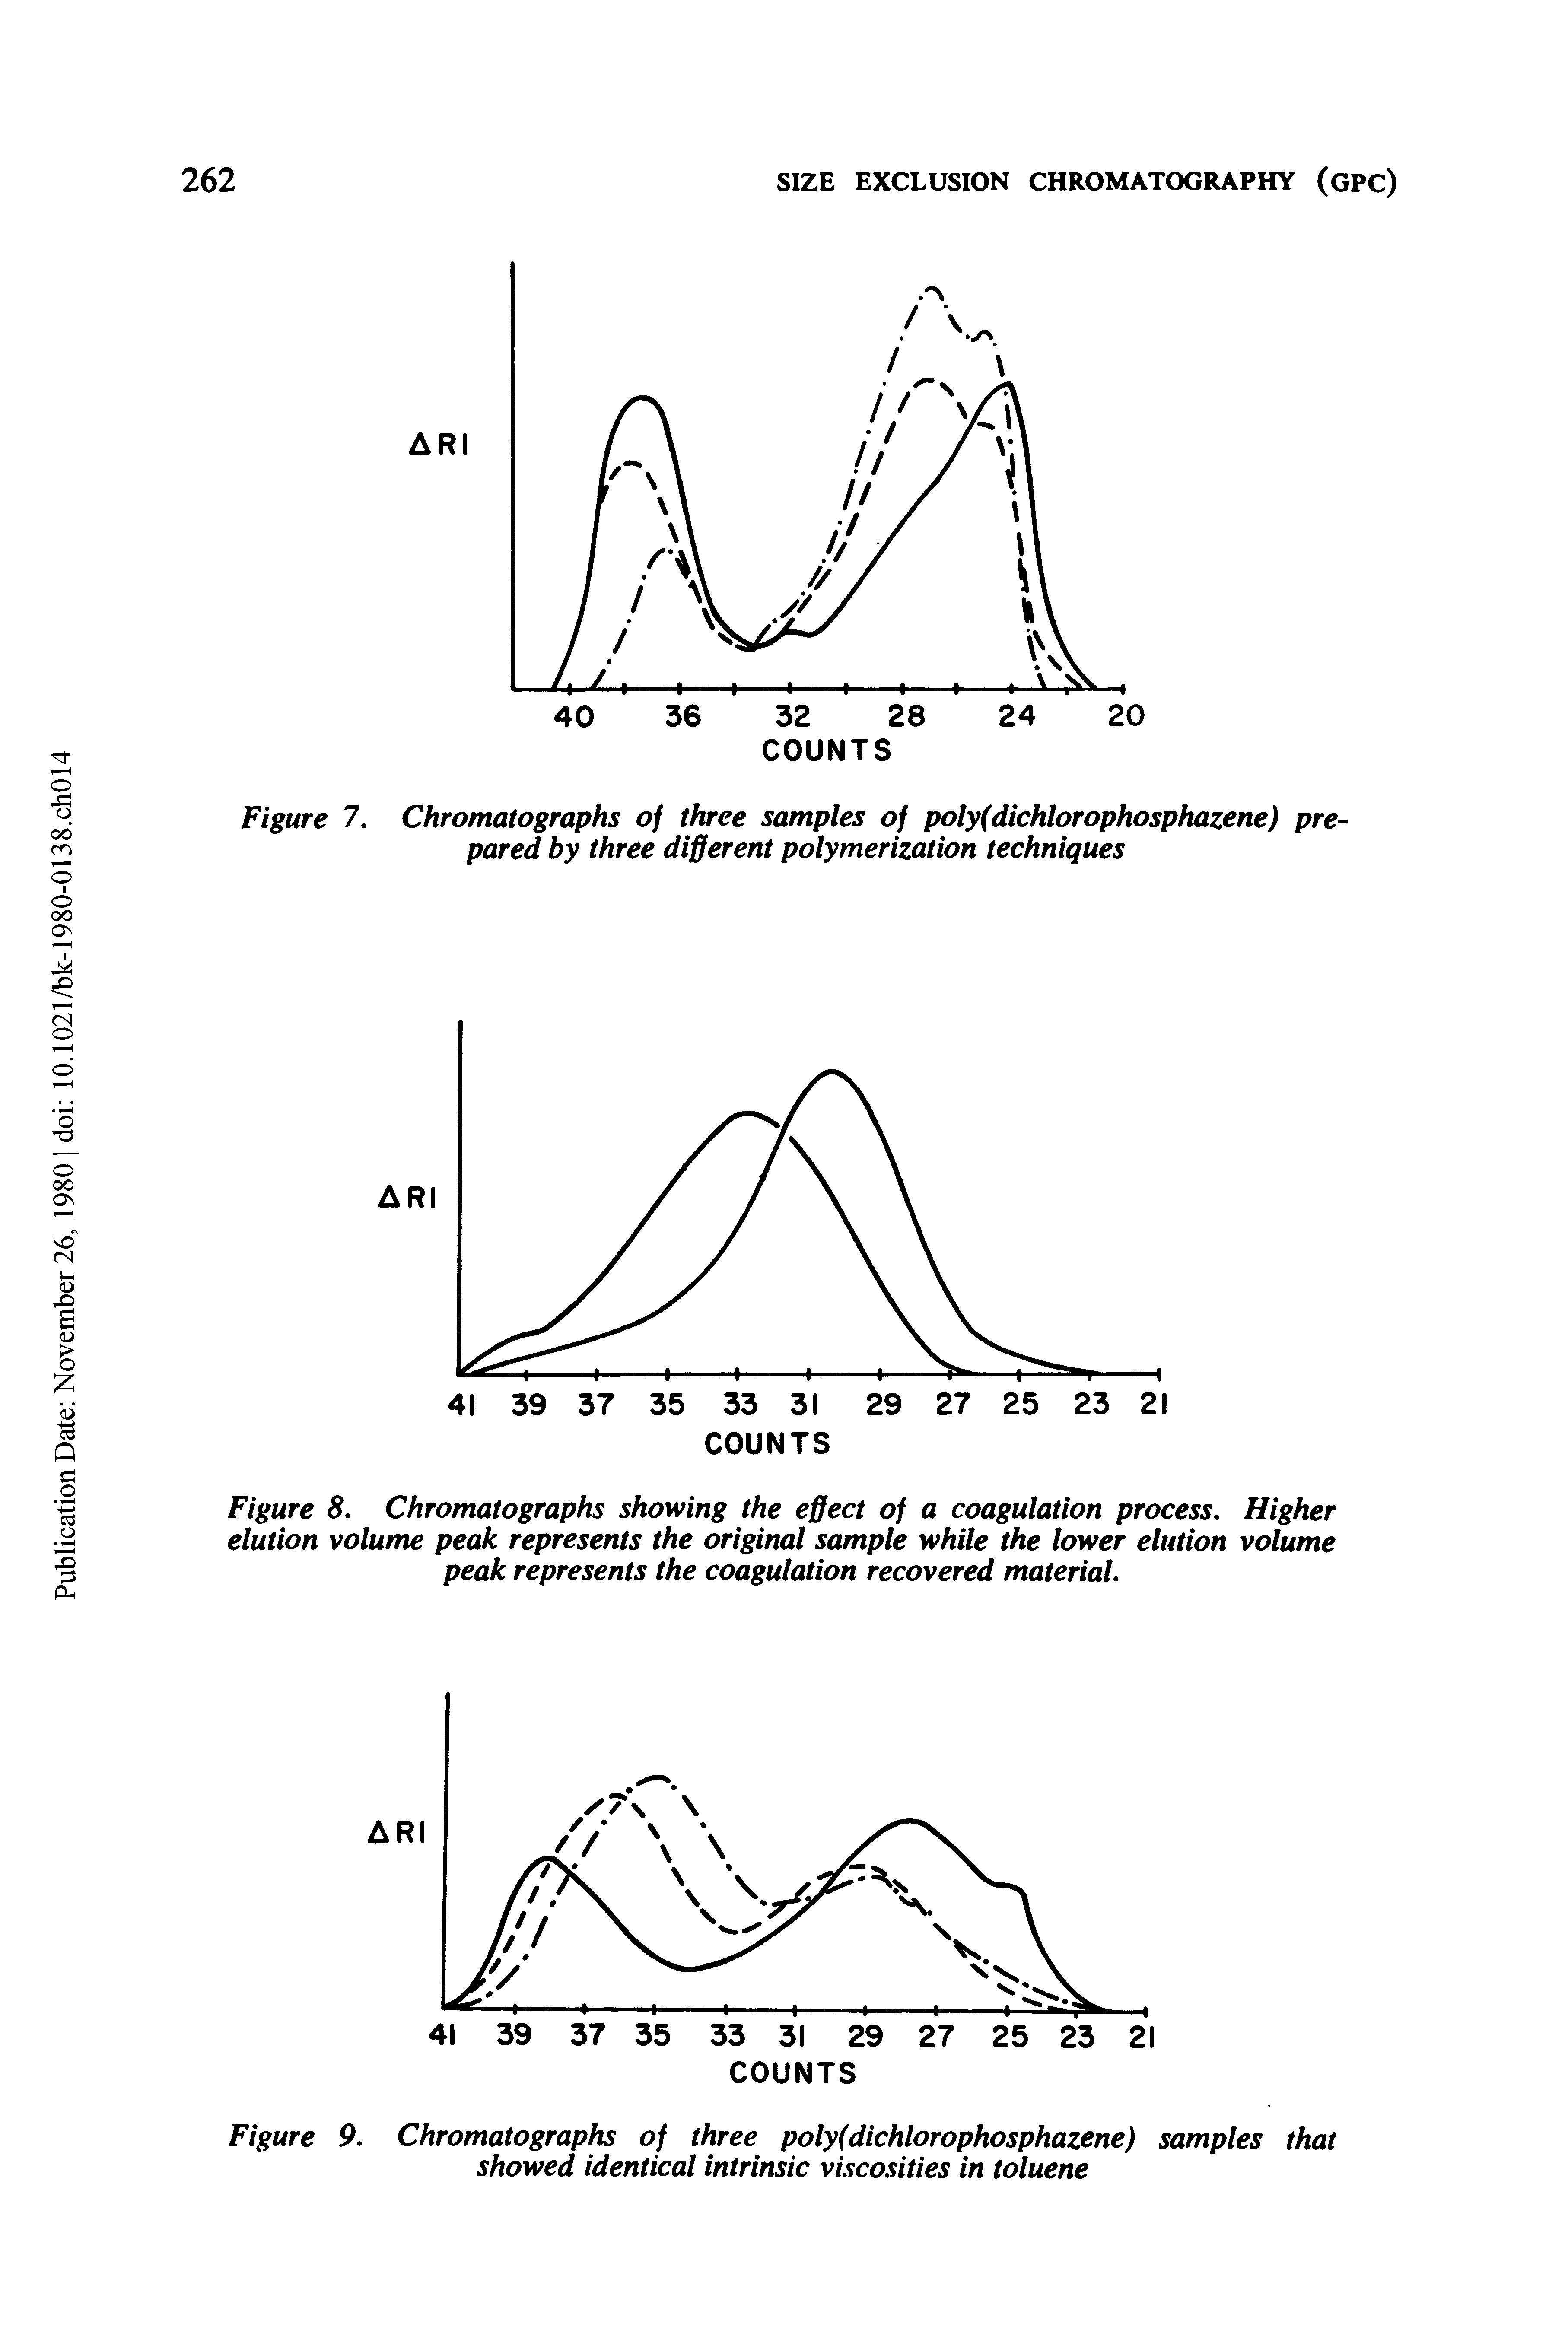 Figure 8. Chromatographs showing the effect of a coagulation process. Higher elution volume peak represents the original sample while the lower elution volume peak represents the coagulation recovered material.